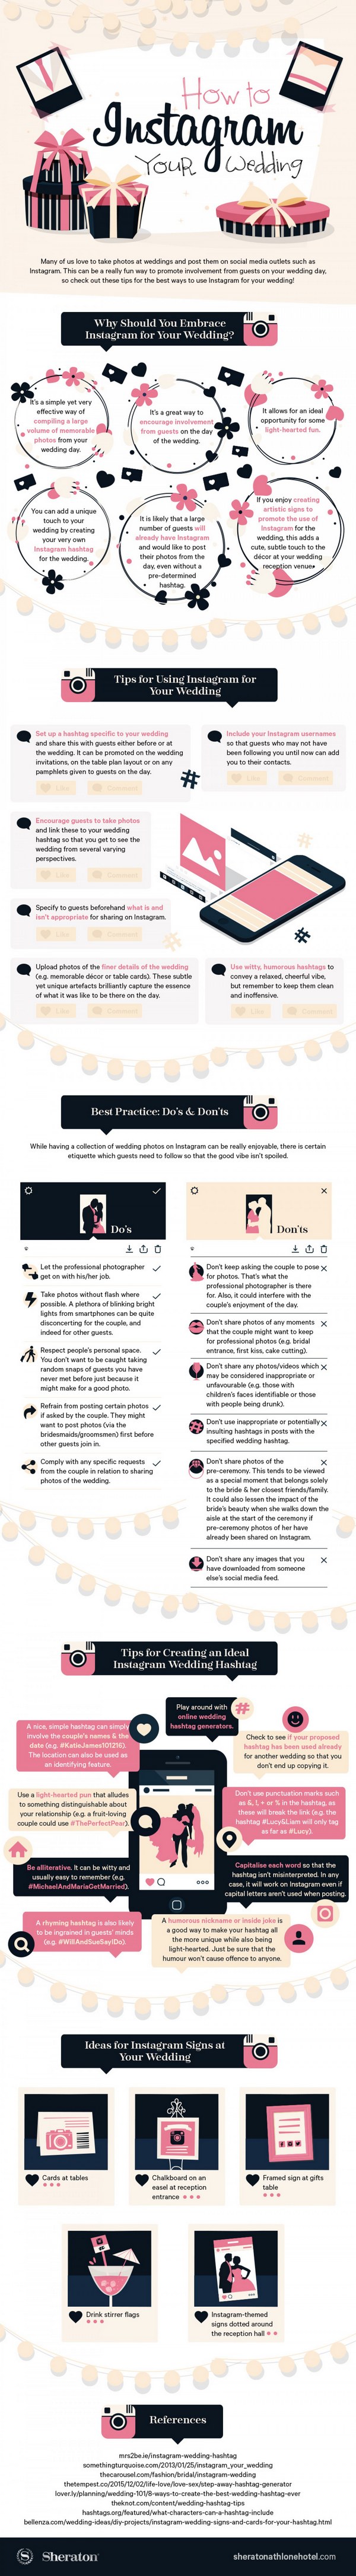 how to instagram your wedding infographic